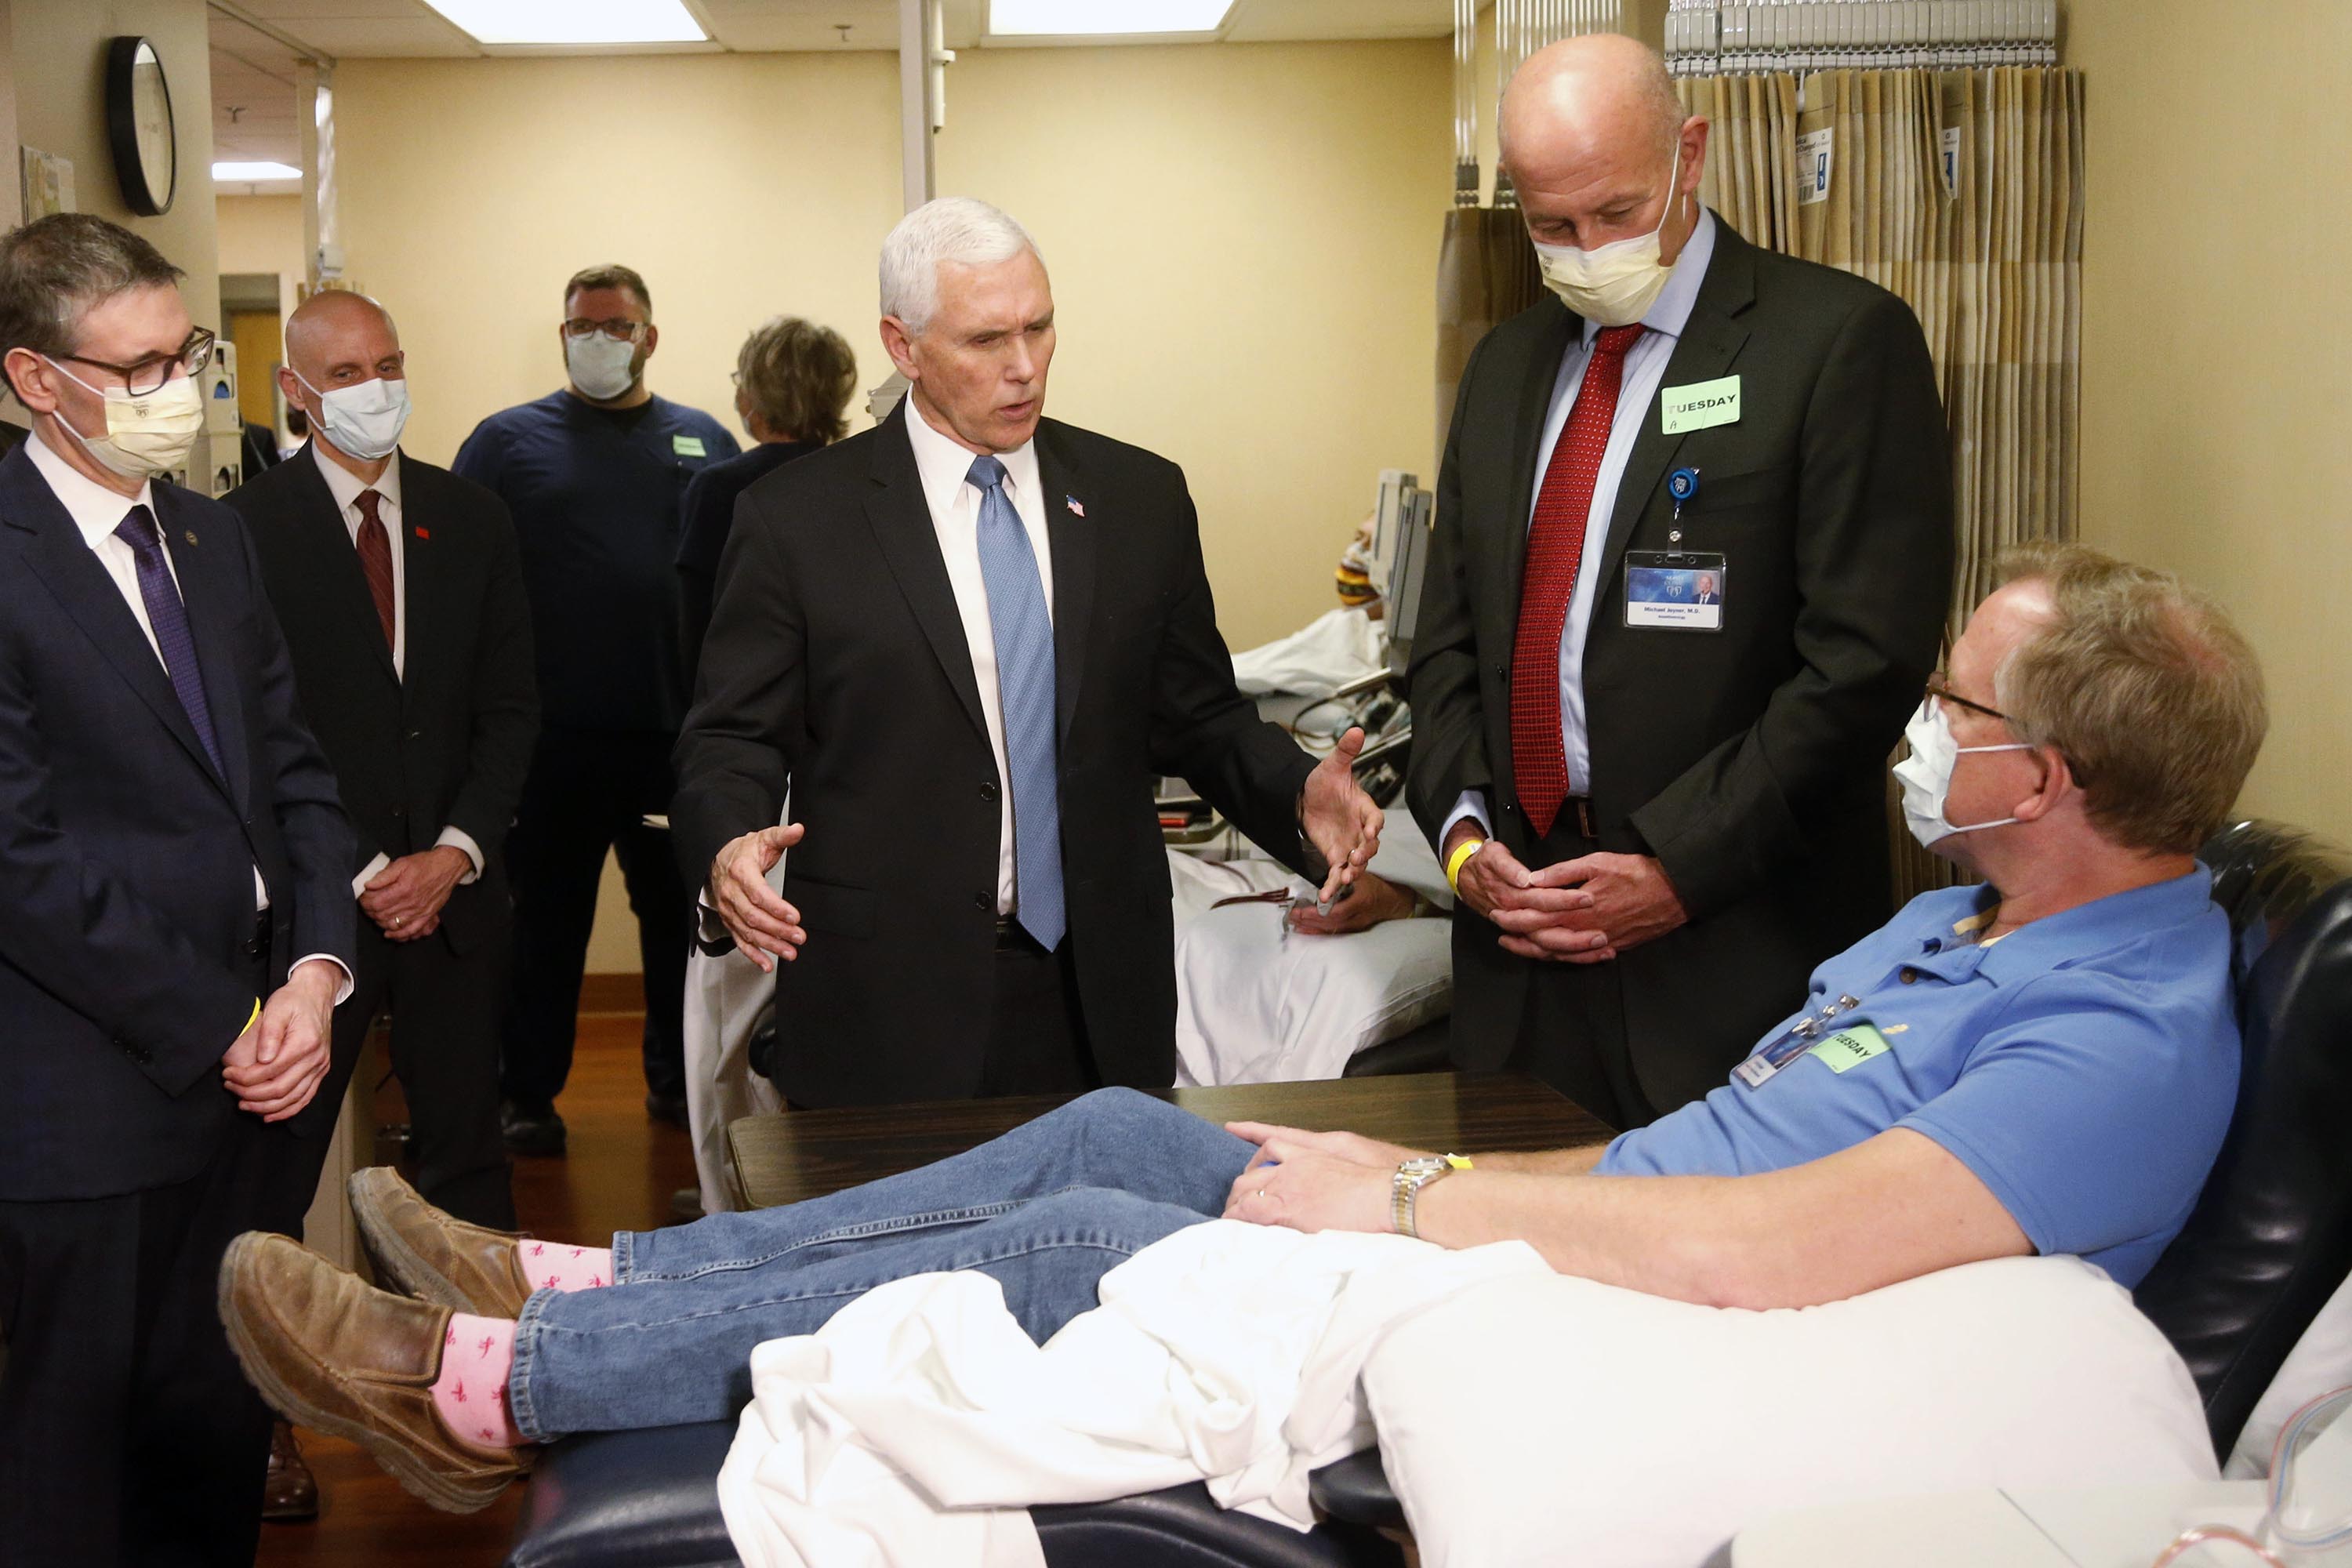 Vice President Mike Pence, center, visits Dennis Nelson, a patient who survived the coronavirus and was going to donate blood, during a tour of the Mayo Clinic in Rochester, Minnesota, on Tuesday, April 28.